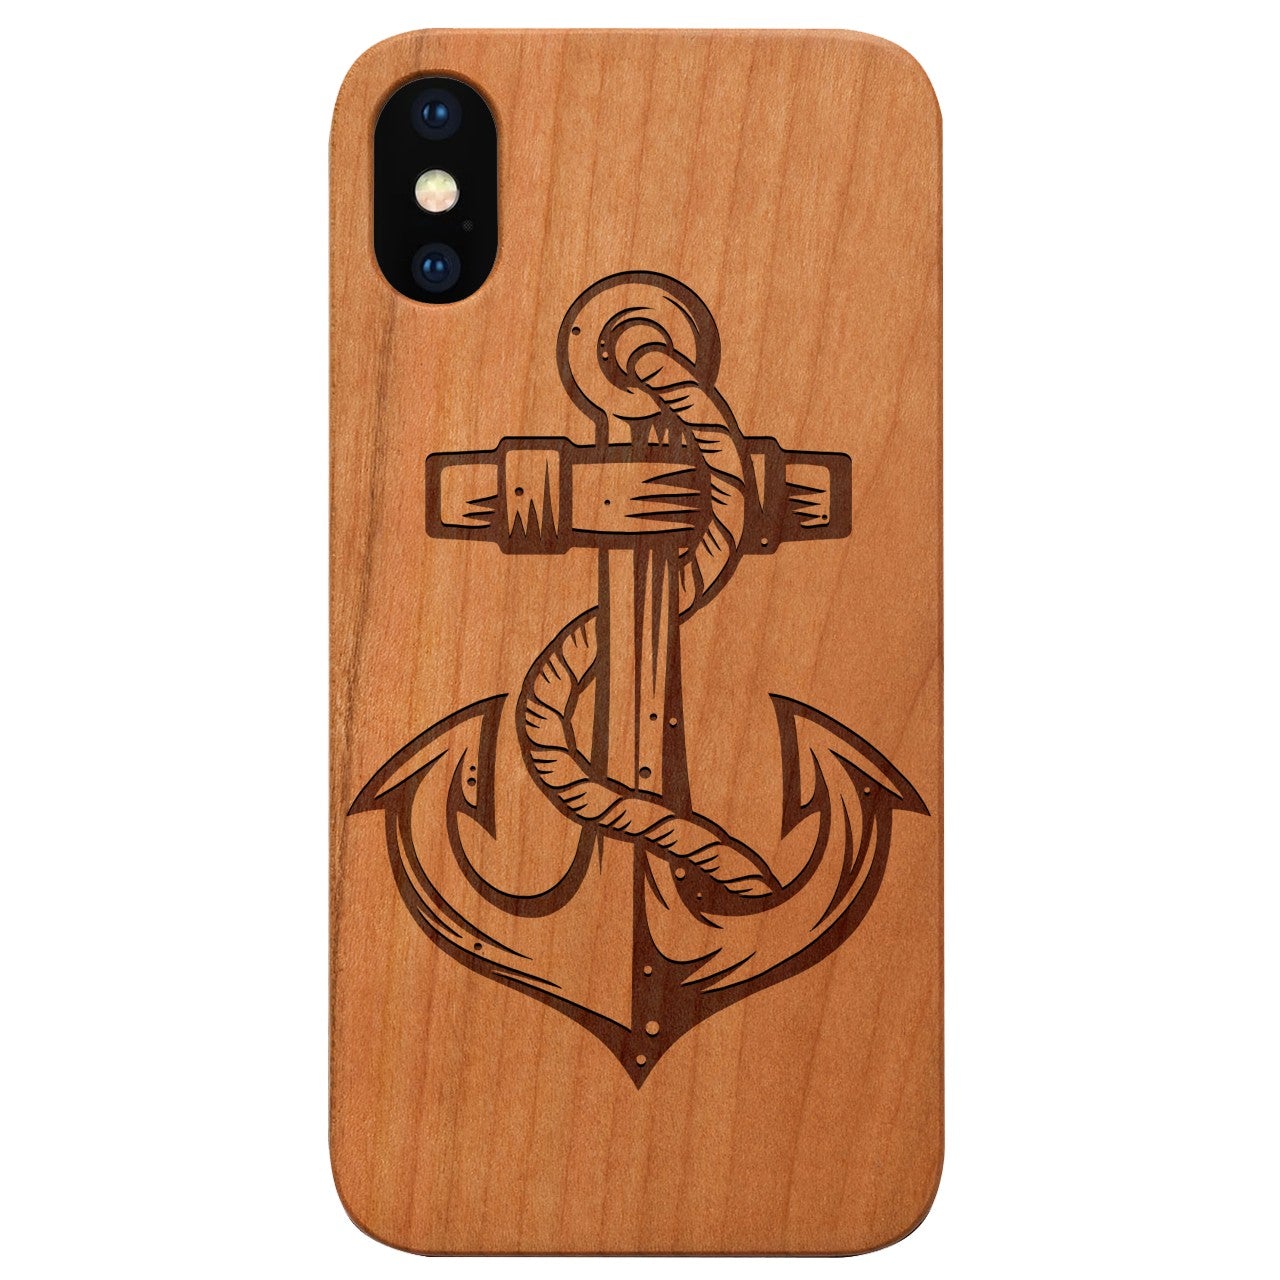  Anchor 1 - Engraved - Wooden Phone Case - IPhone 13 Models